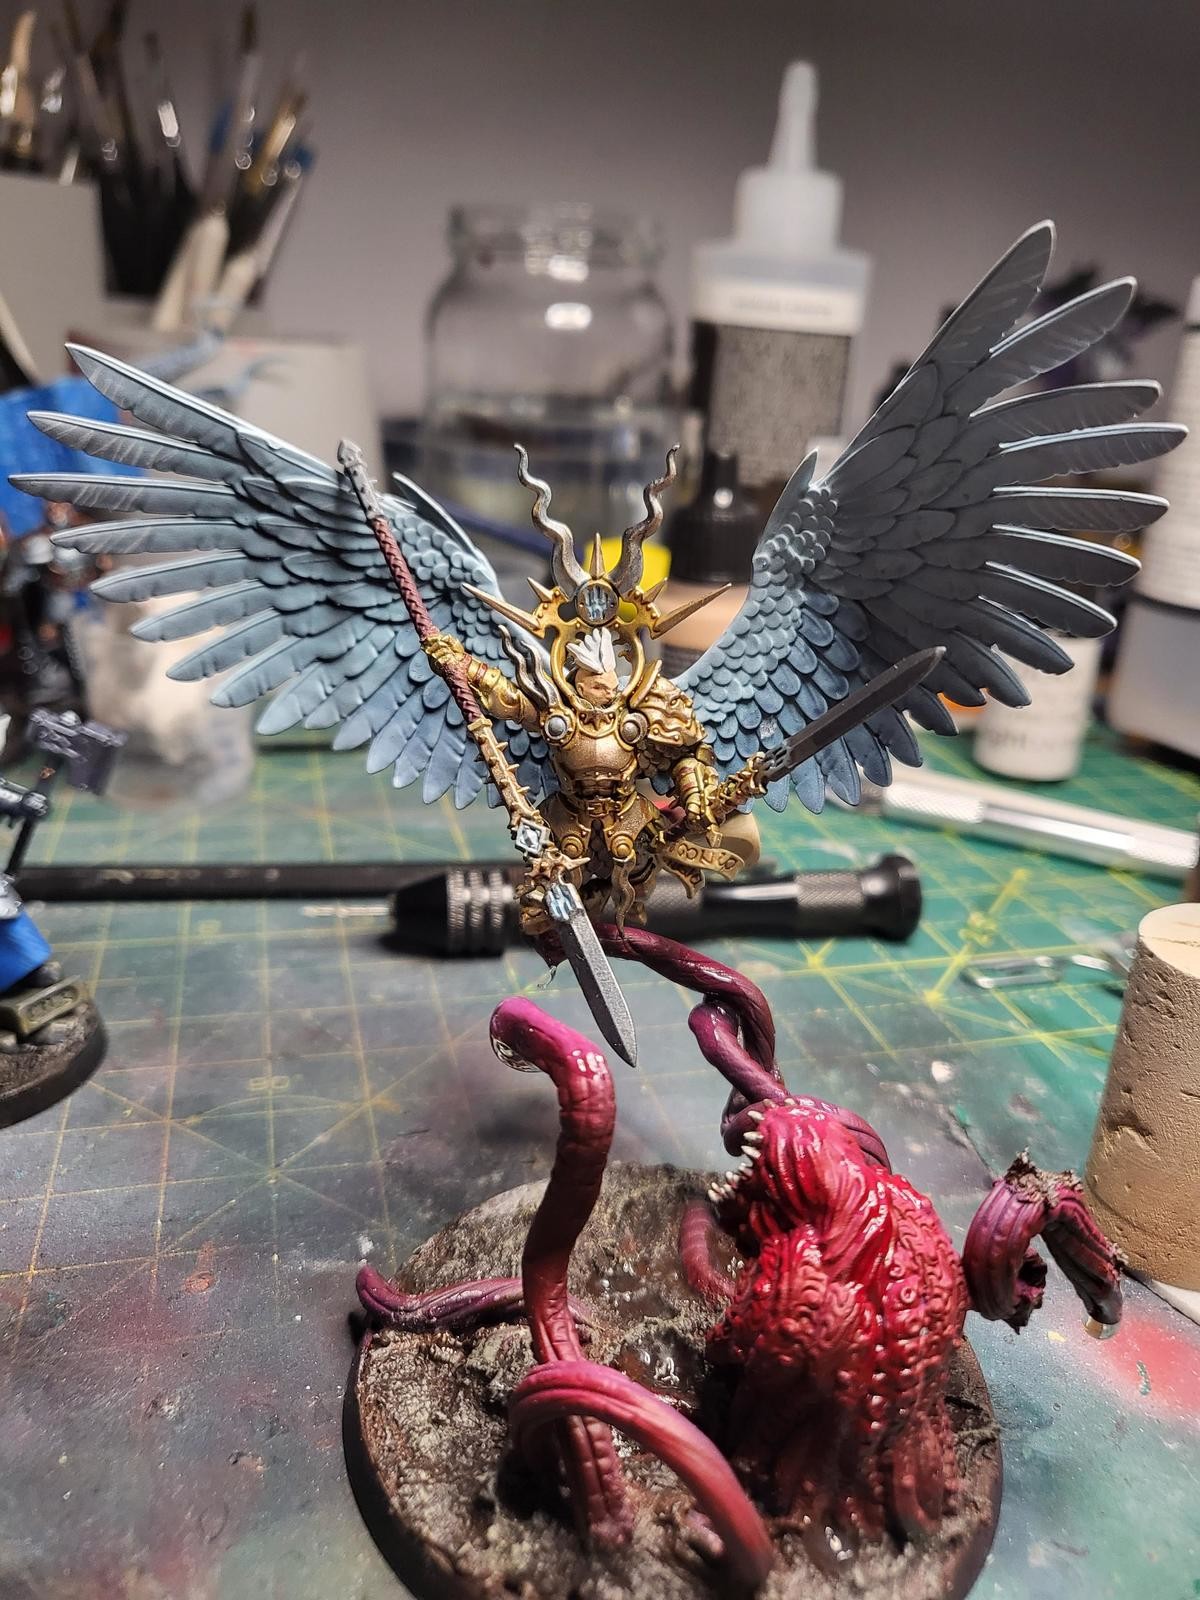 They fly now? They fly now!. 90% done with some stormcast. Surprised how much I enjoyed making the sigmarines. But once again greenstuff and conversions... yeah man! Are you rocking Hallowed Knights or your own thing?